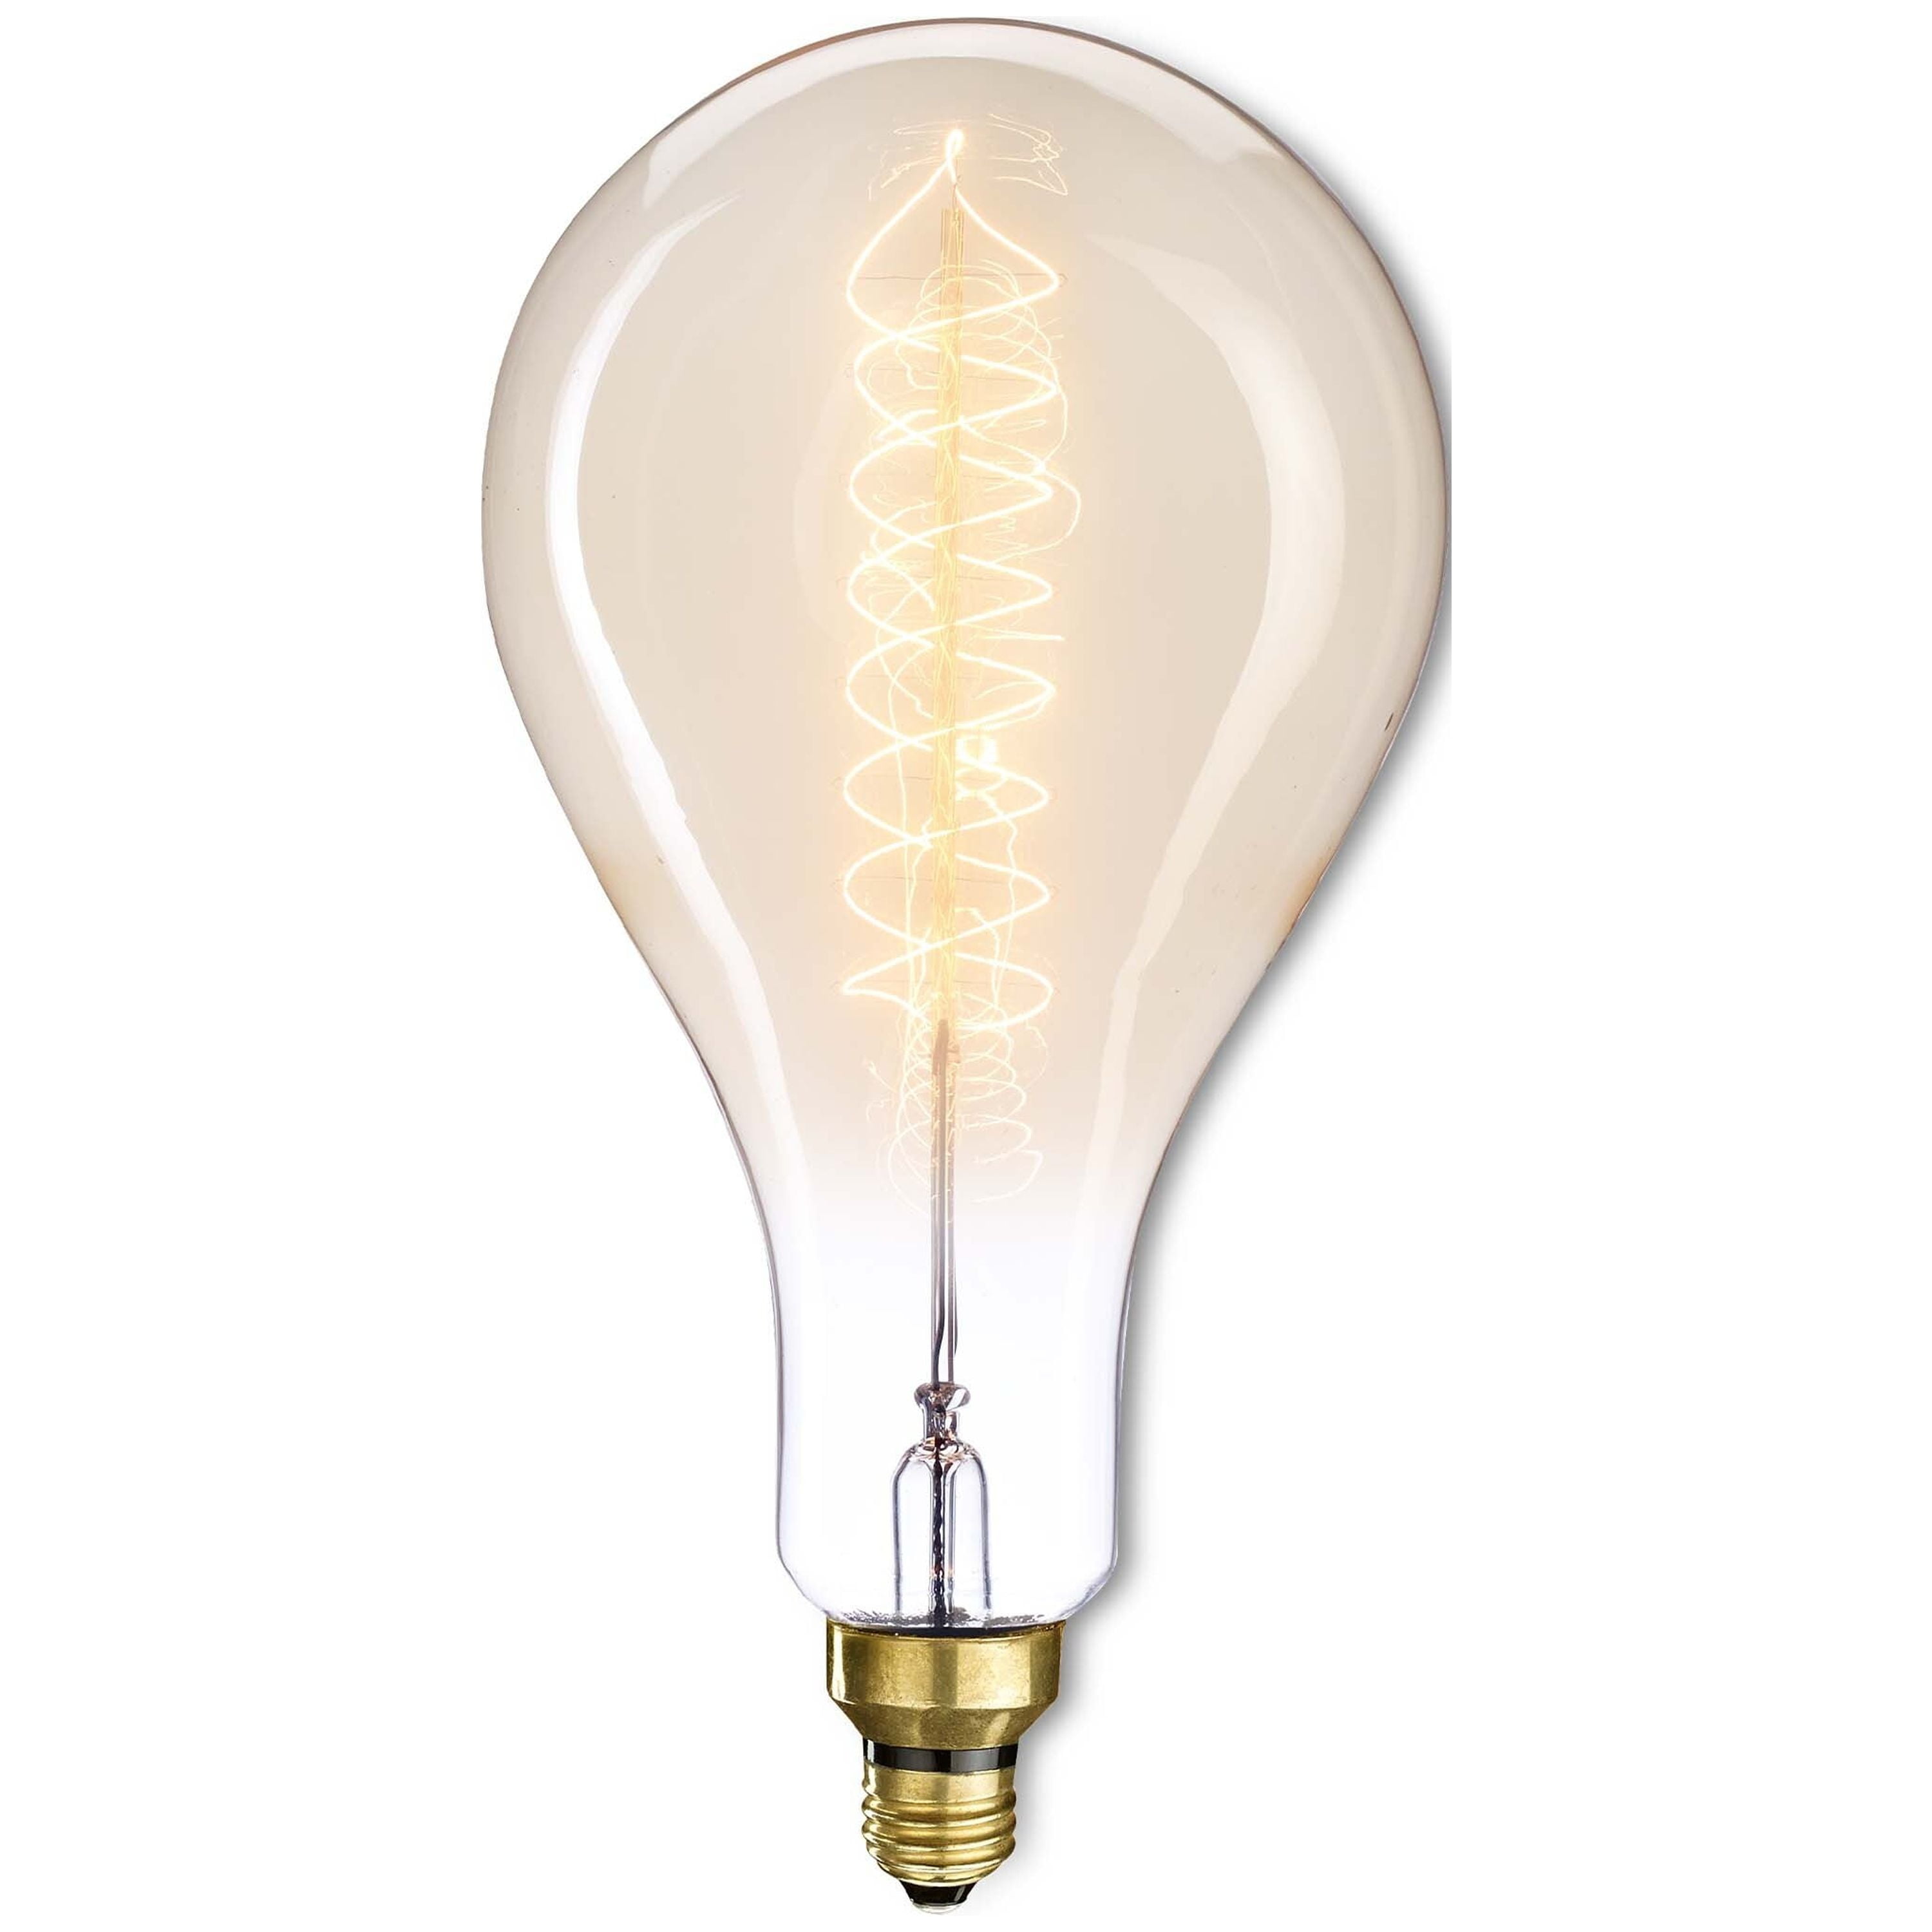 Picture of Bulbrite Grand Nostalgic Collection 60 Watt Dimmable Pear Shape Oversized Decorative Incandescent Light Bulb with Medium (E26) Base  2200K Amber Light  Antique Glass Finish